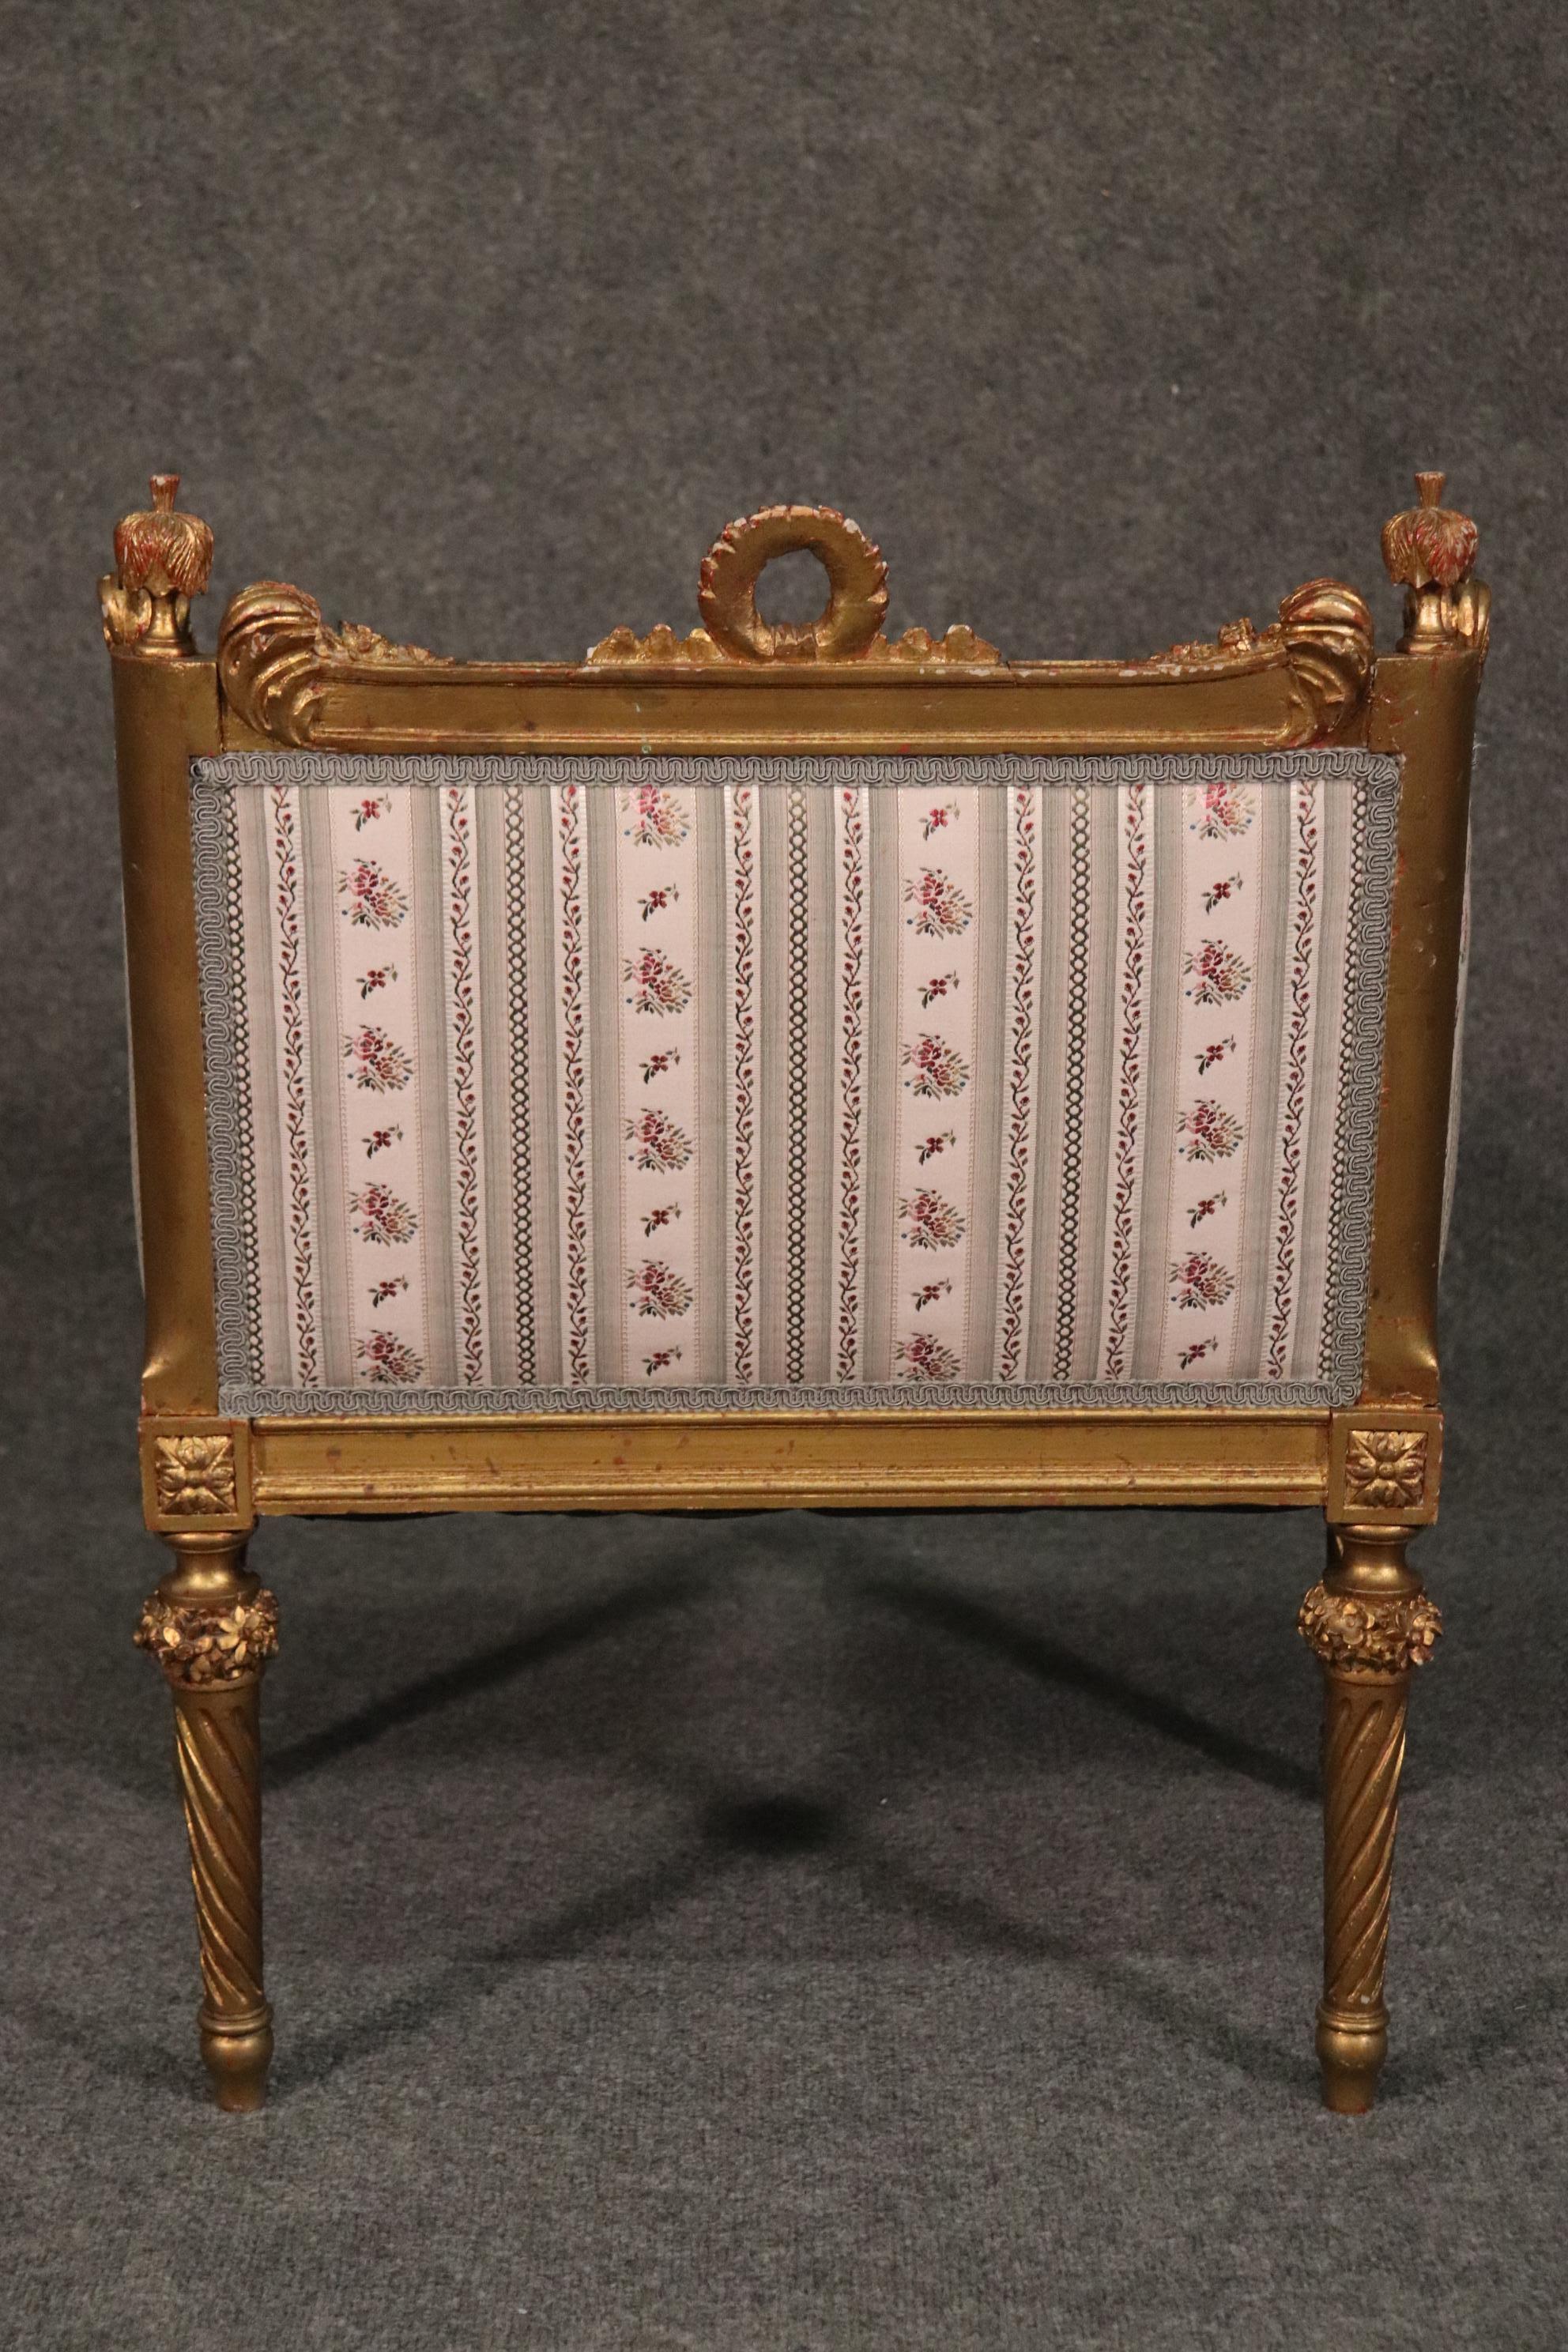 Beech Heavily Carved Gilded French Louis XVI Bergere Chair Circa 1890